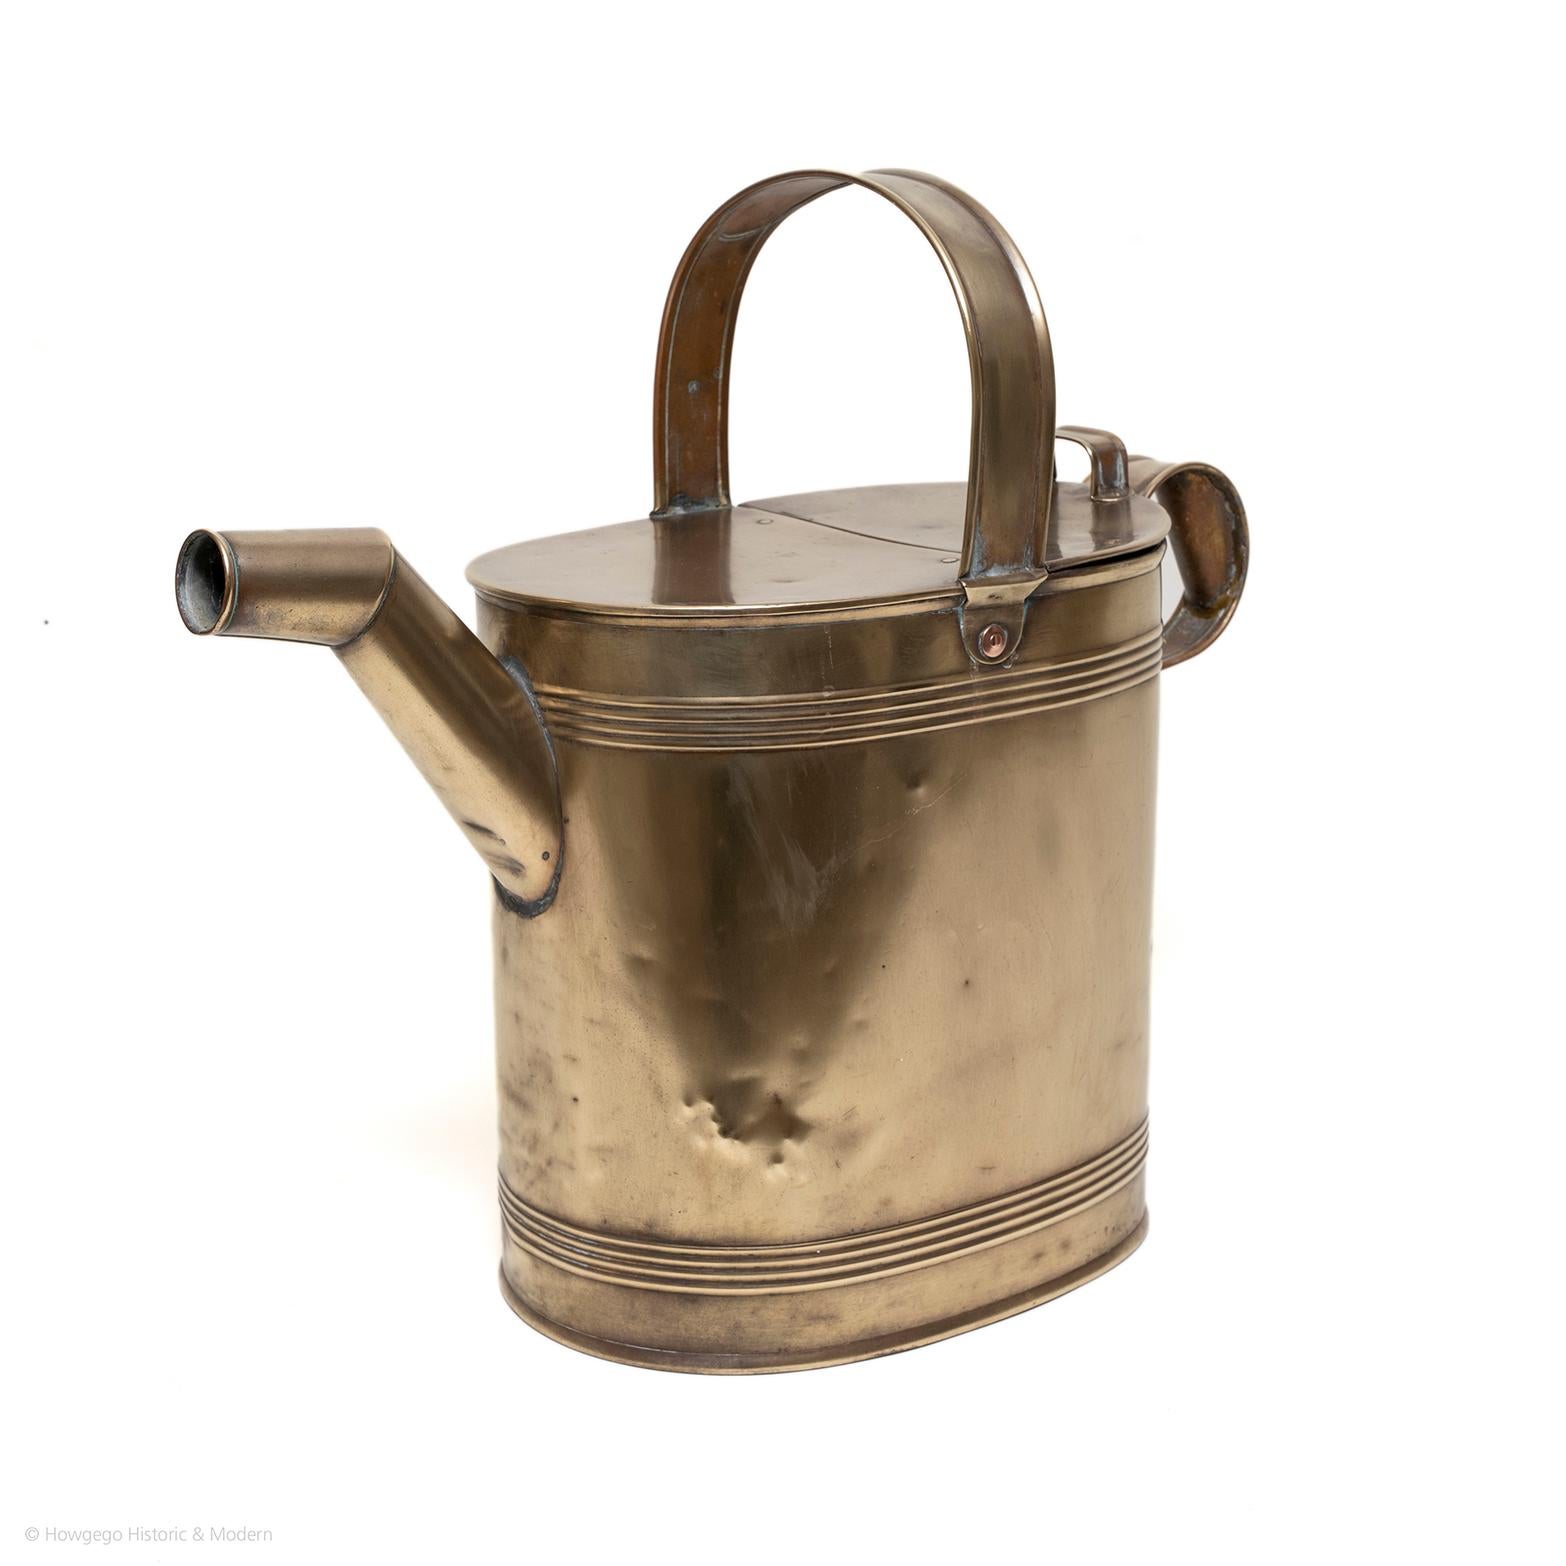 Beautiful collectors item or decorative object.
Suitable for regular use injecting a touch of history into gardening

A fine Victorian oval, brass watering can or hot water jug. Upper brass handle across top, back section of the top hinged to